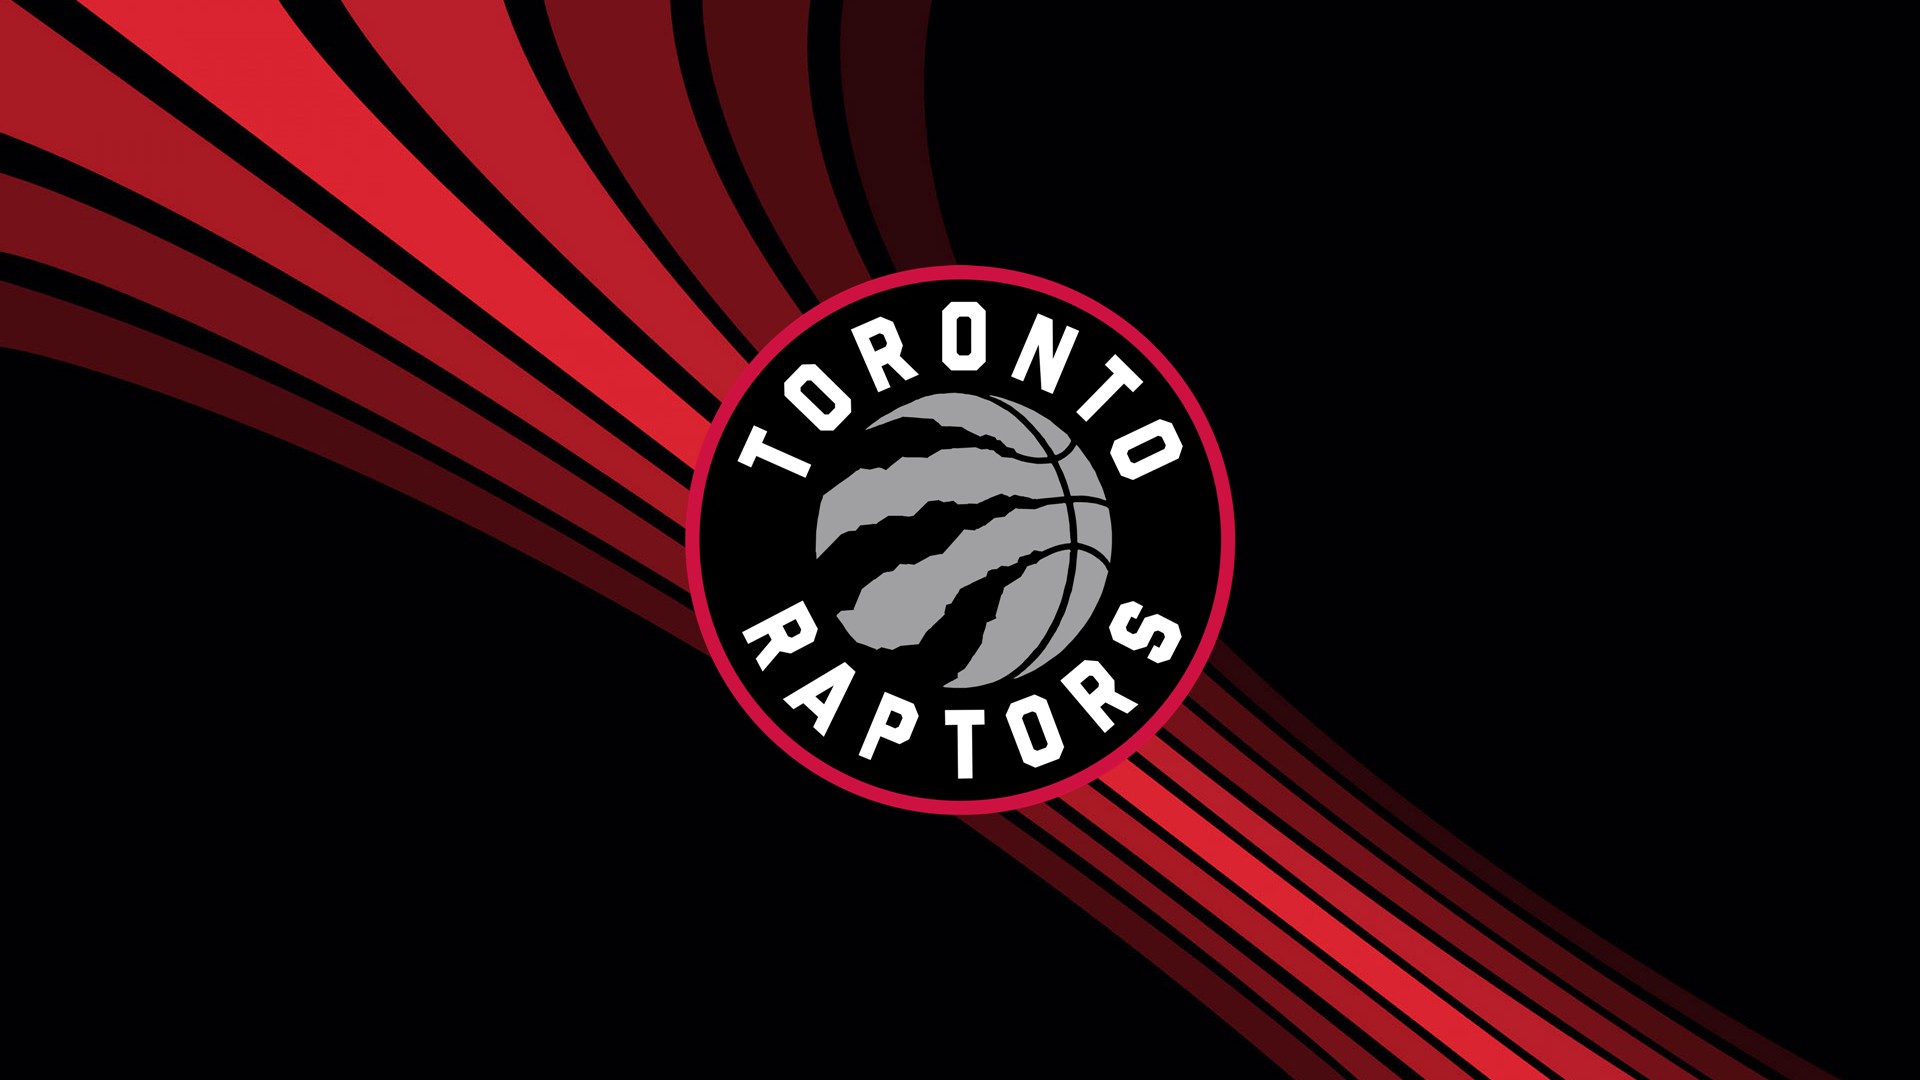 Toronto Raptors For PC Wallpaper with image dimensions 1920x1080 pixel. You can make this wallpaper for your Desktop Computer Backgrounds, Windows or Mac Screensavers, iPhone Lock screen, Tablet or Android and another Mobile Phone device